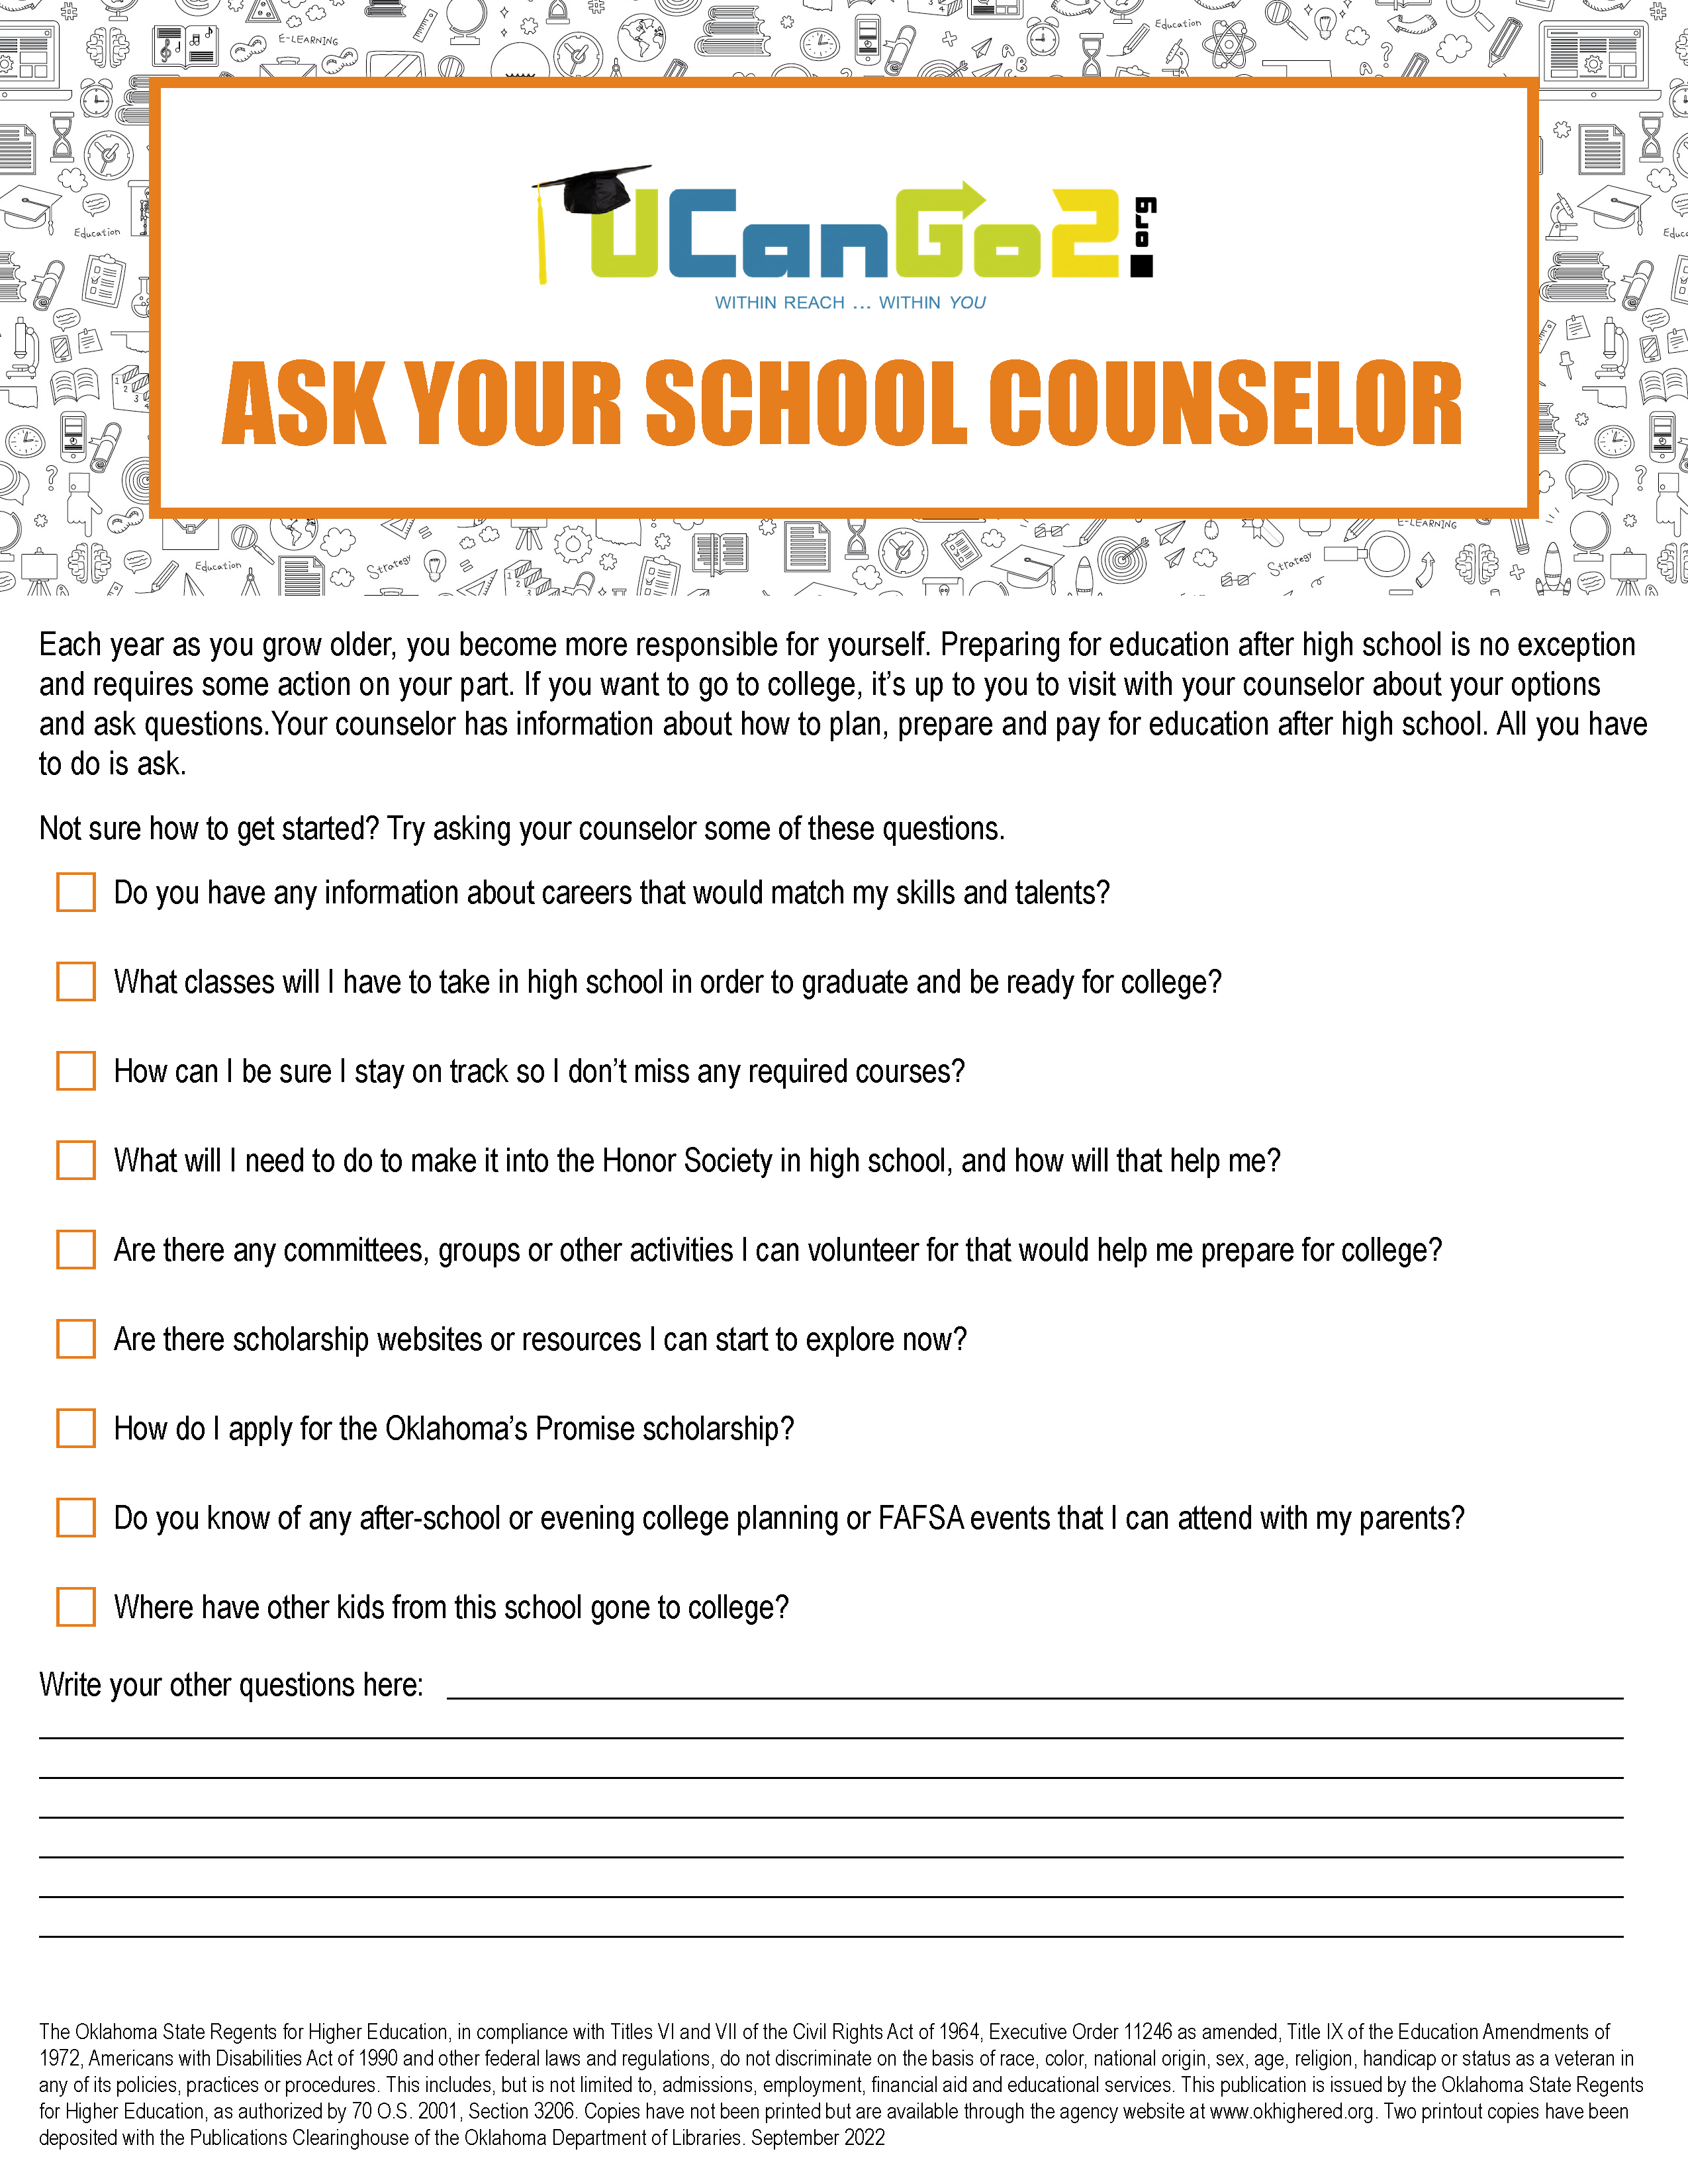 PDF of Ask Your School Counselor Flyer opens in a new tab